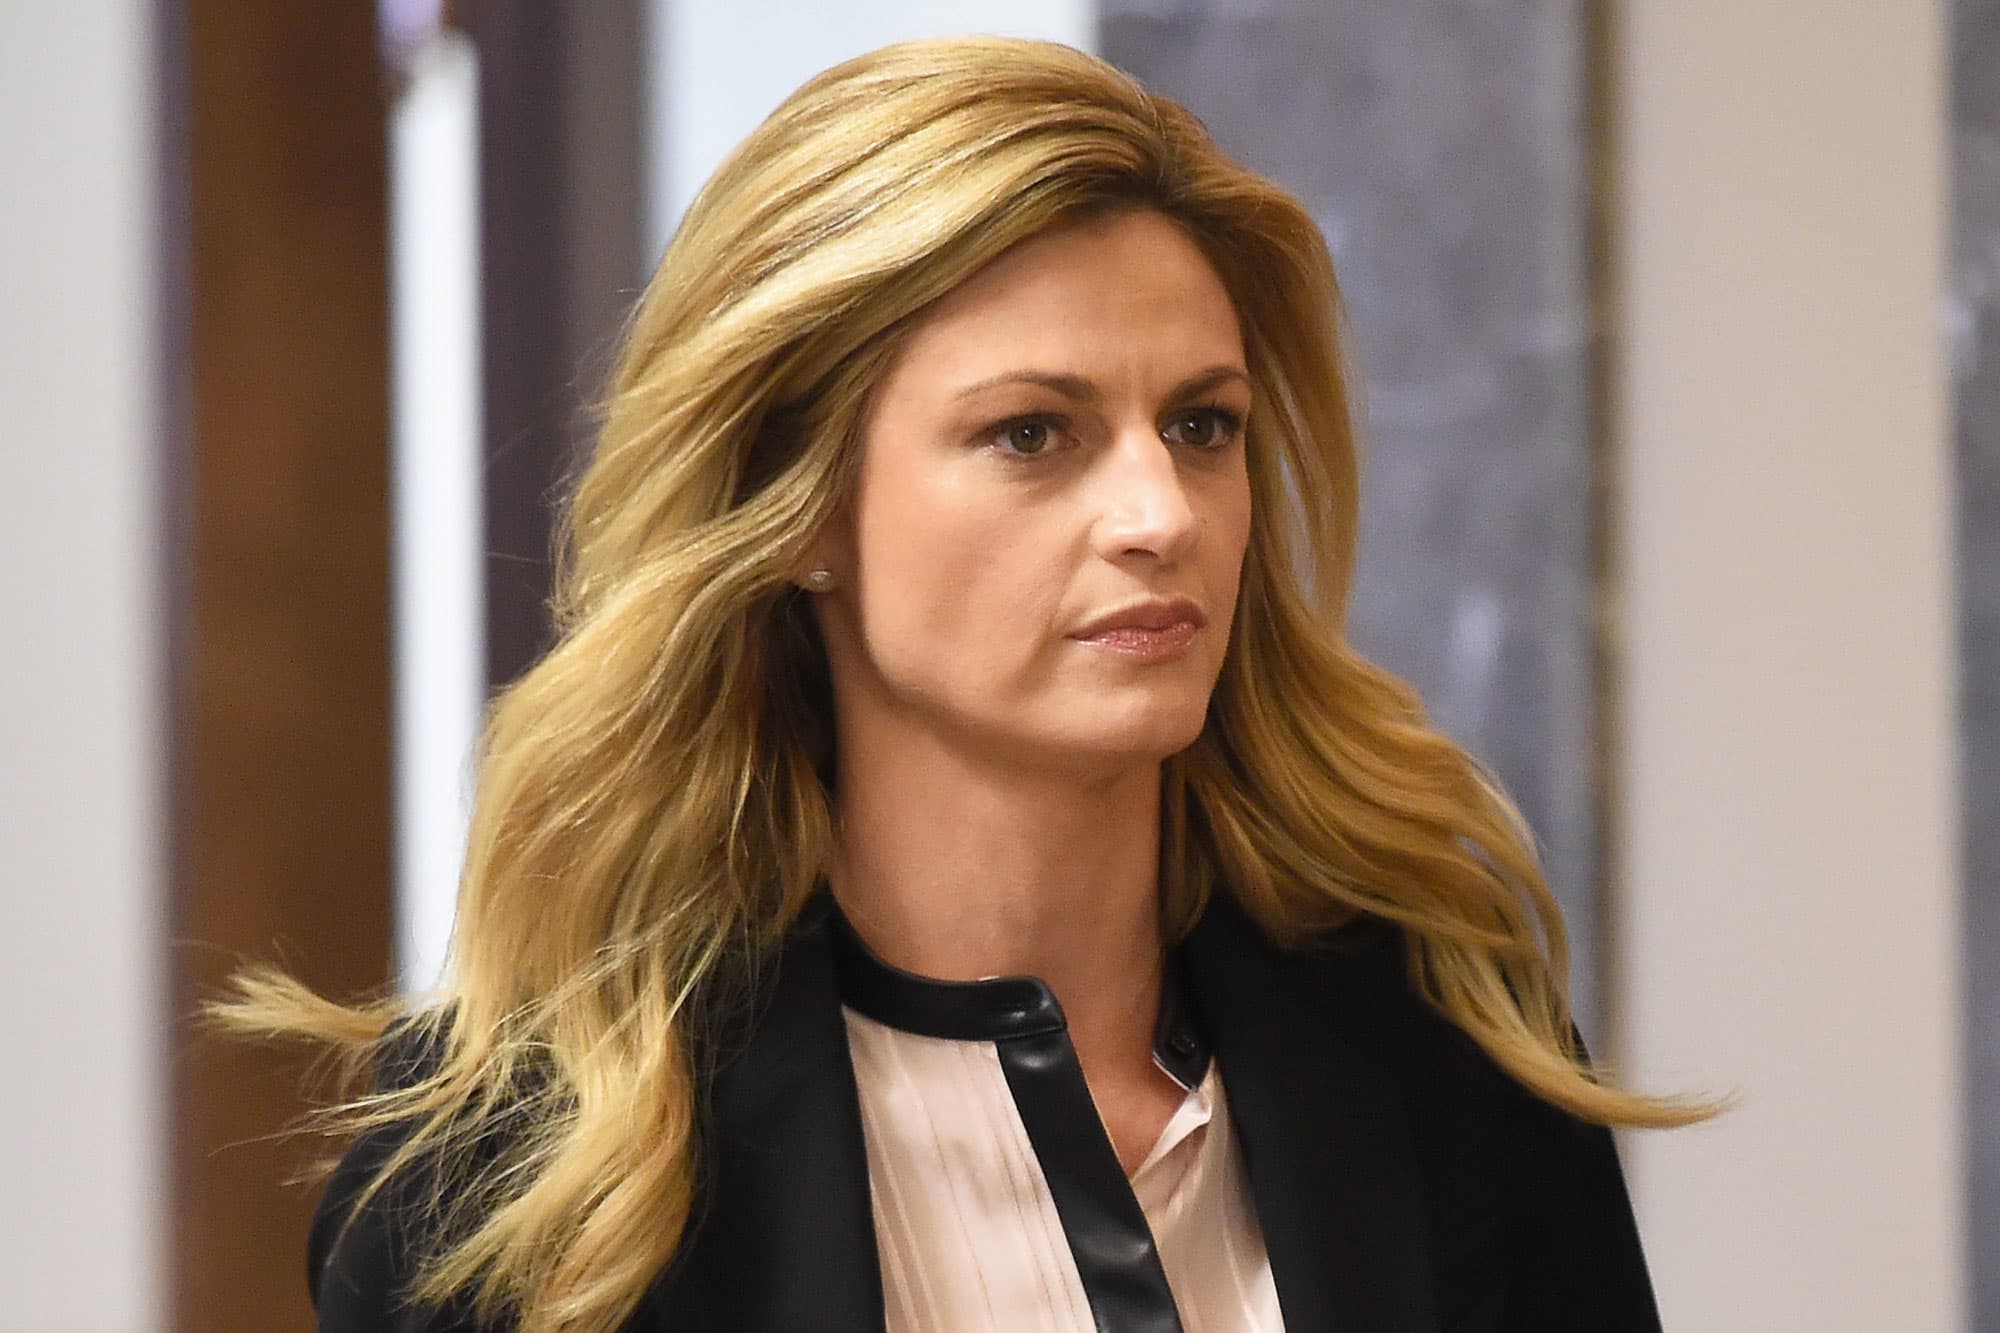 brandi ross recommends watch erin andrews nude pic